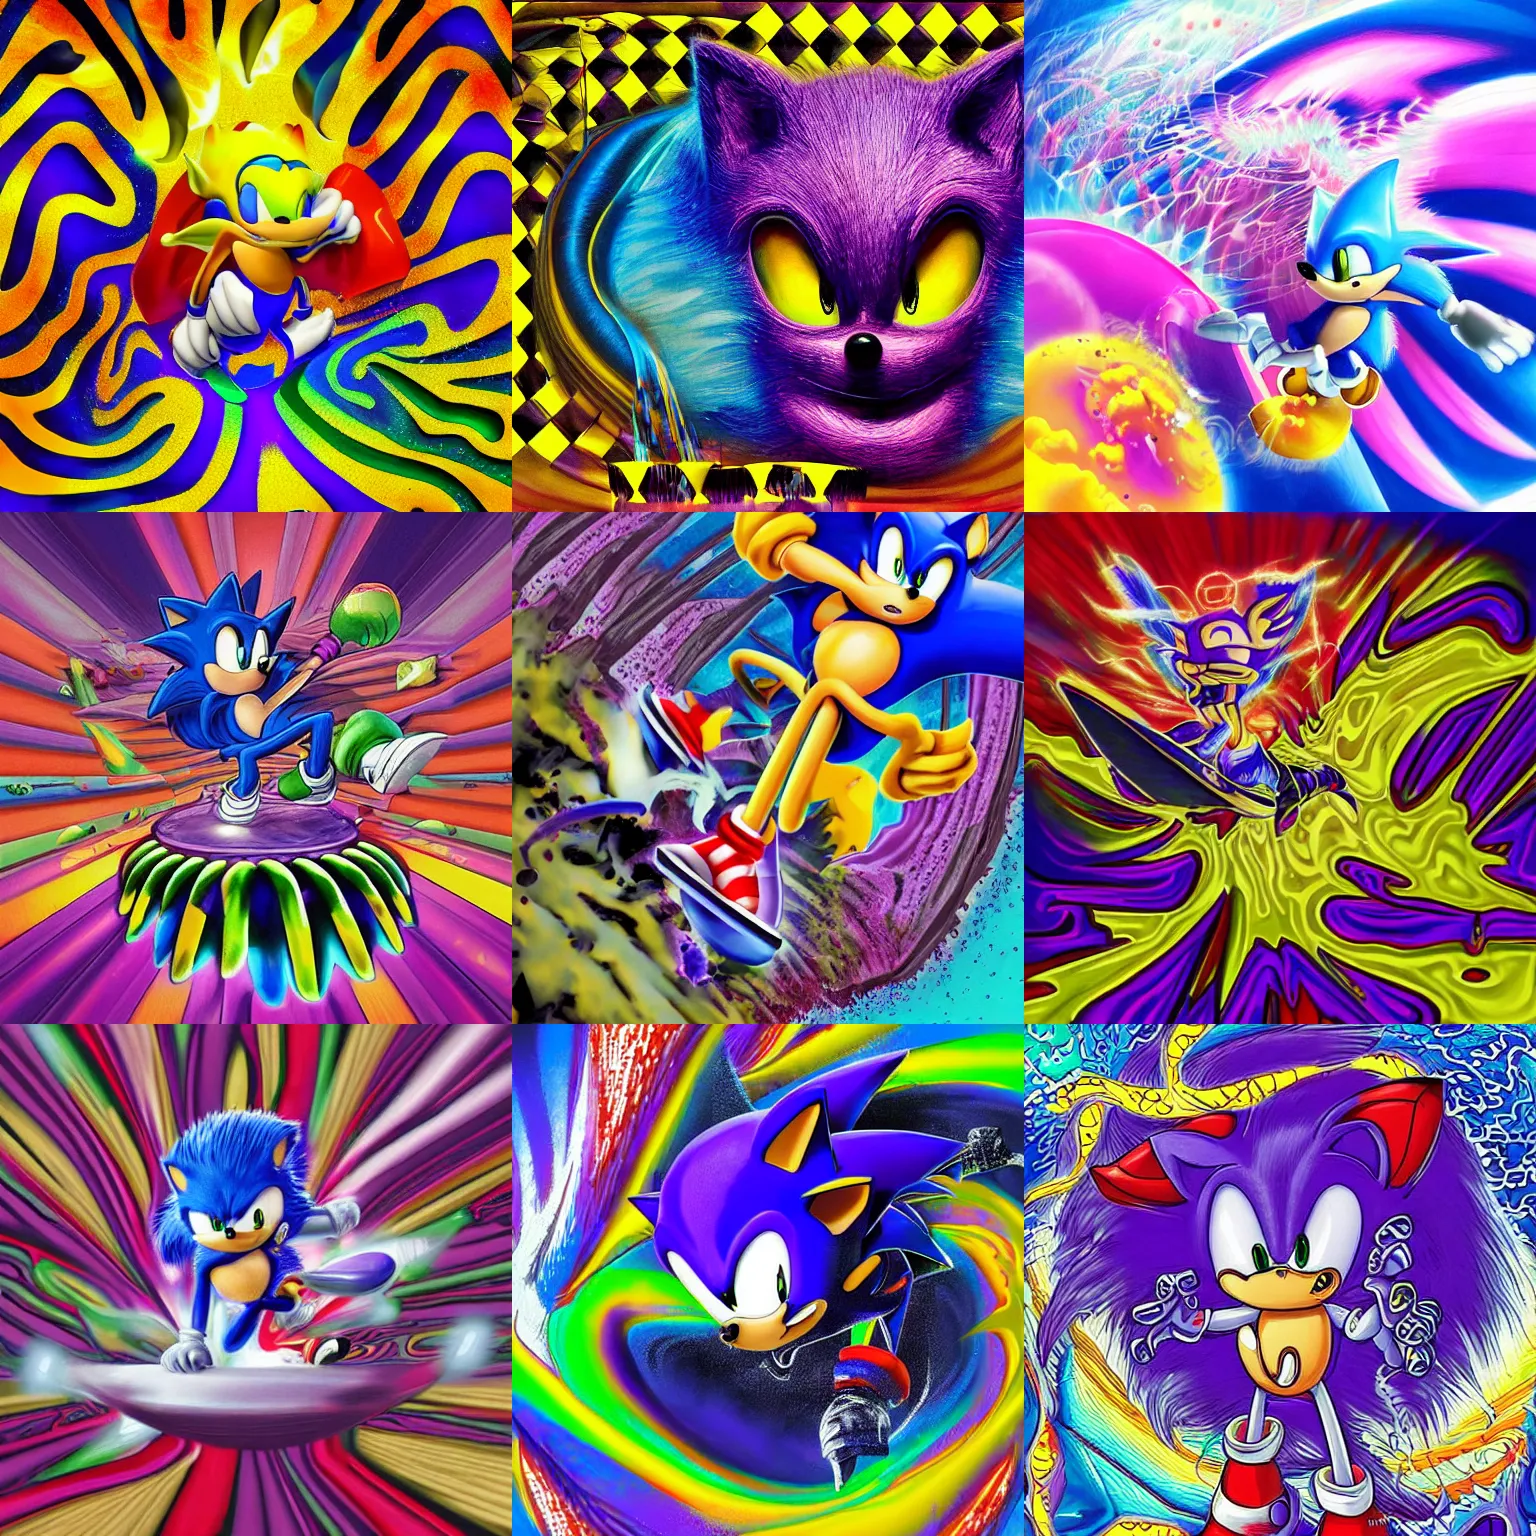 Prompt: surreal, sharp, detailed professional, high quality portrait sonic airbrush art MGMT album cover portrait of a liquid dissolving LSD DMT sonic the hedgehog surfing through cyberspace, purple checkerboard background, 1990s 1992 Sega Genesis video game album cover